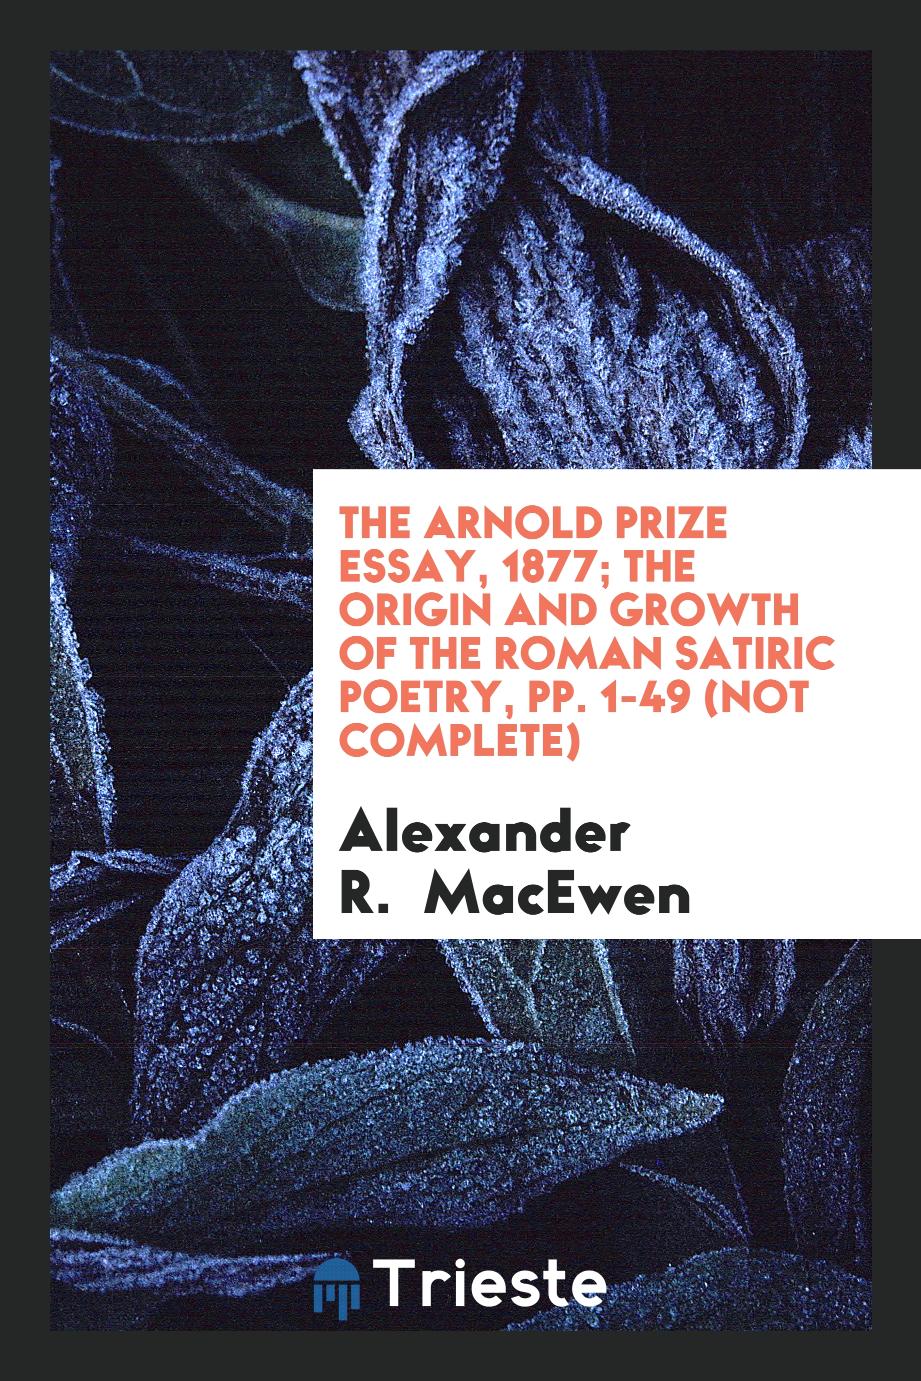 The Arnold Prize Essay, 1877; The Origin and Growth of the Roman Satiric Poetry, pp. 1-49 (not complete)